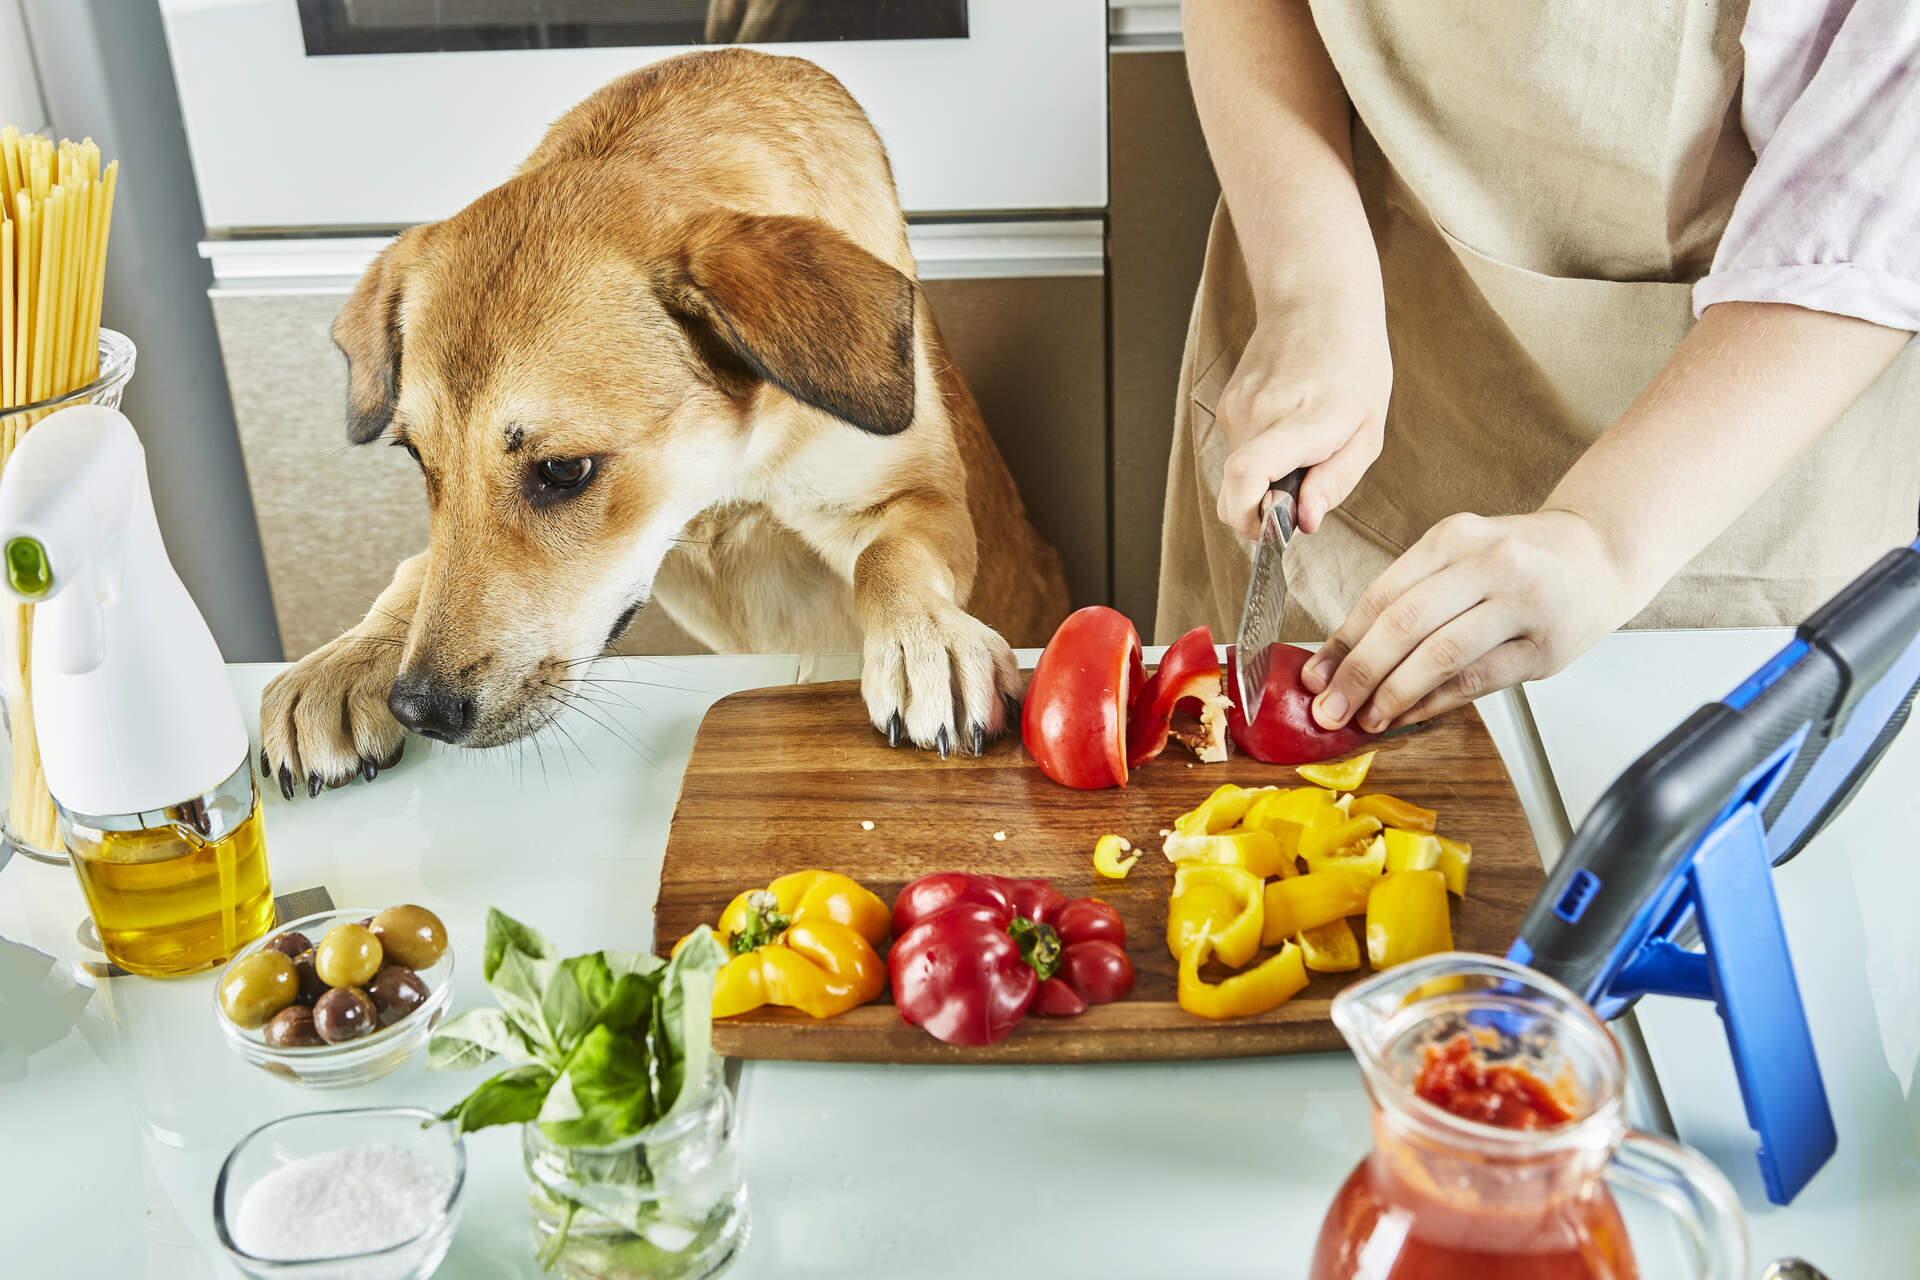 A dog sniffing vegetables on a cutting board